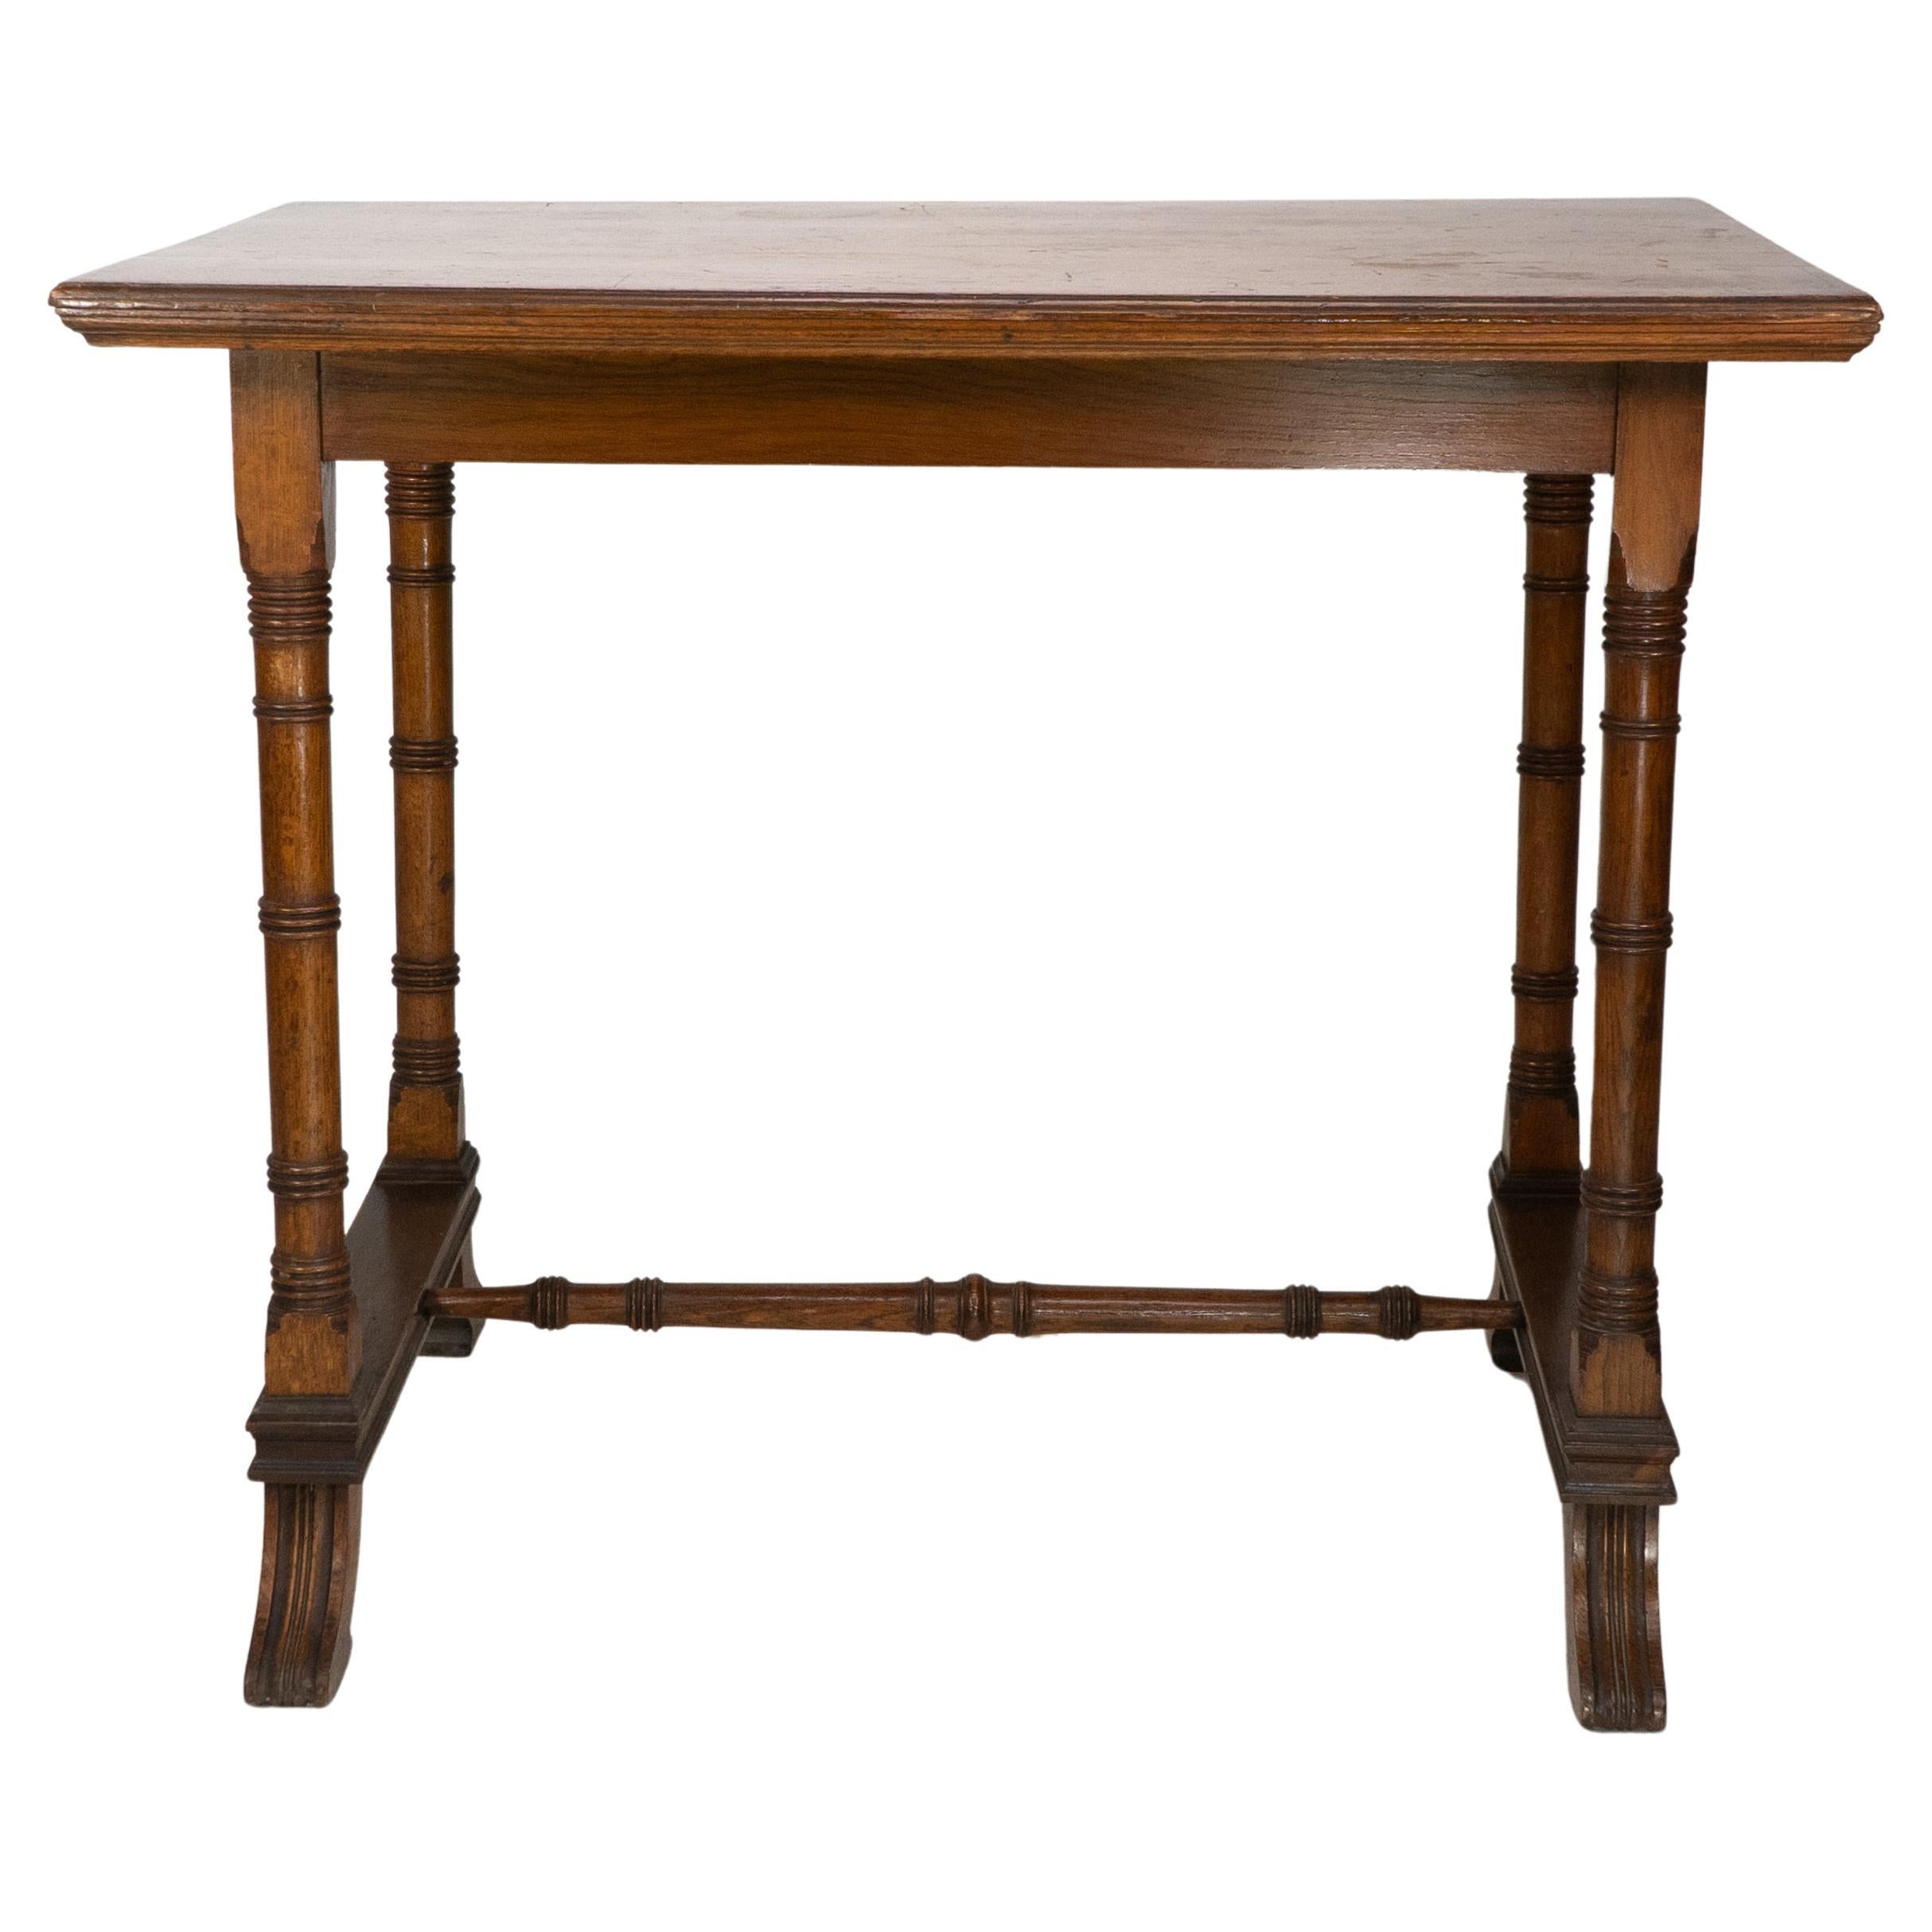 An Aesthetic Movement oak oblong side table with staggered ring turnings to the legs and stood on splayed-out feet united by a fine ring-turned central stretcher.
